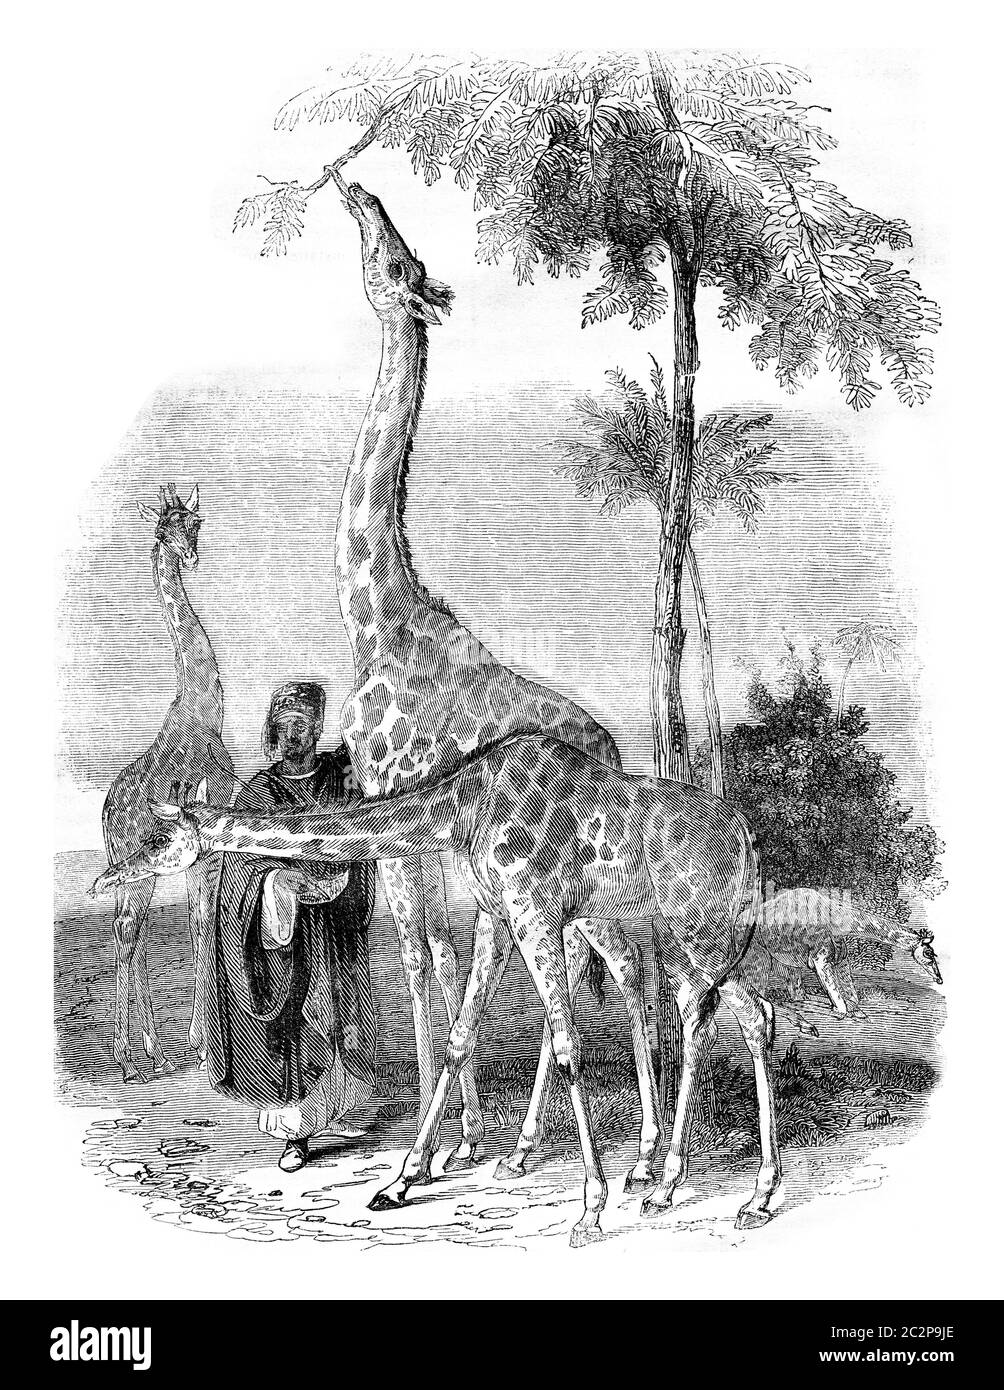 Giraffes arrived in London in 1836, vintage engraved illustration. Magasin Pittoresque 1836. Stock Photo